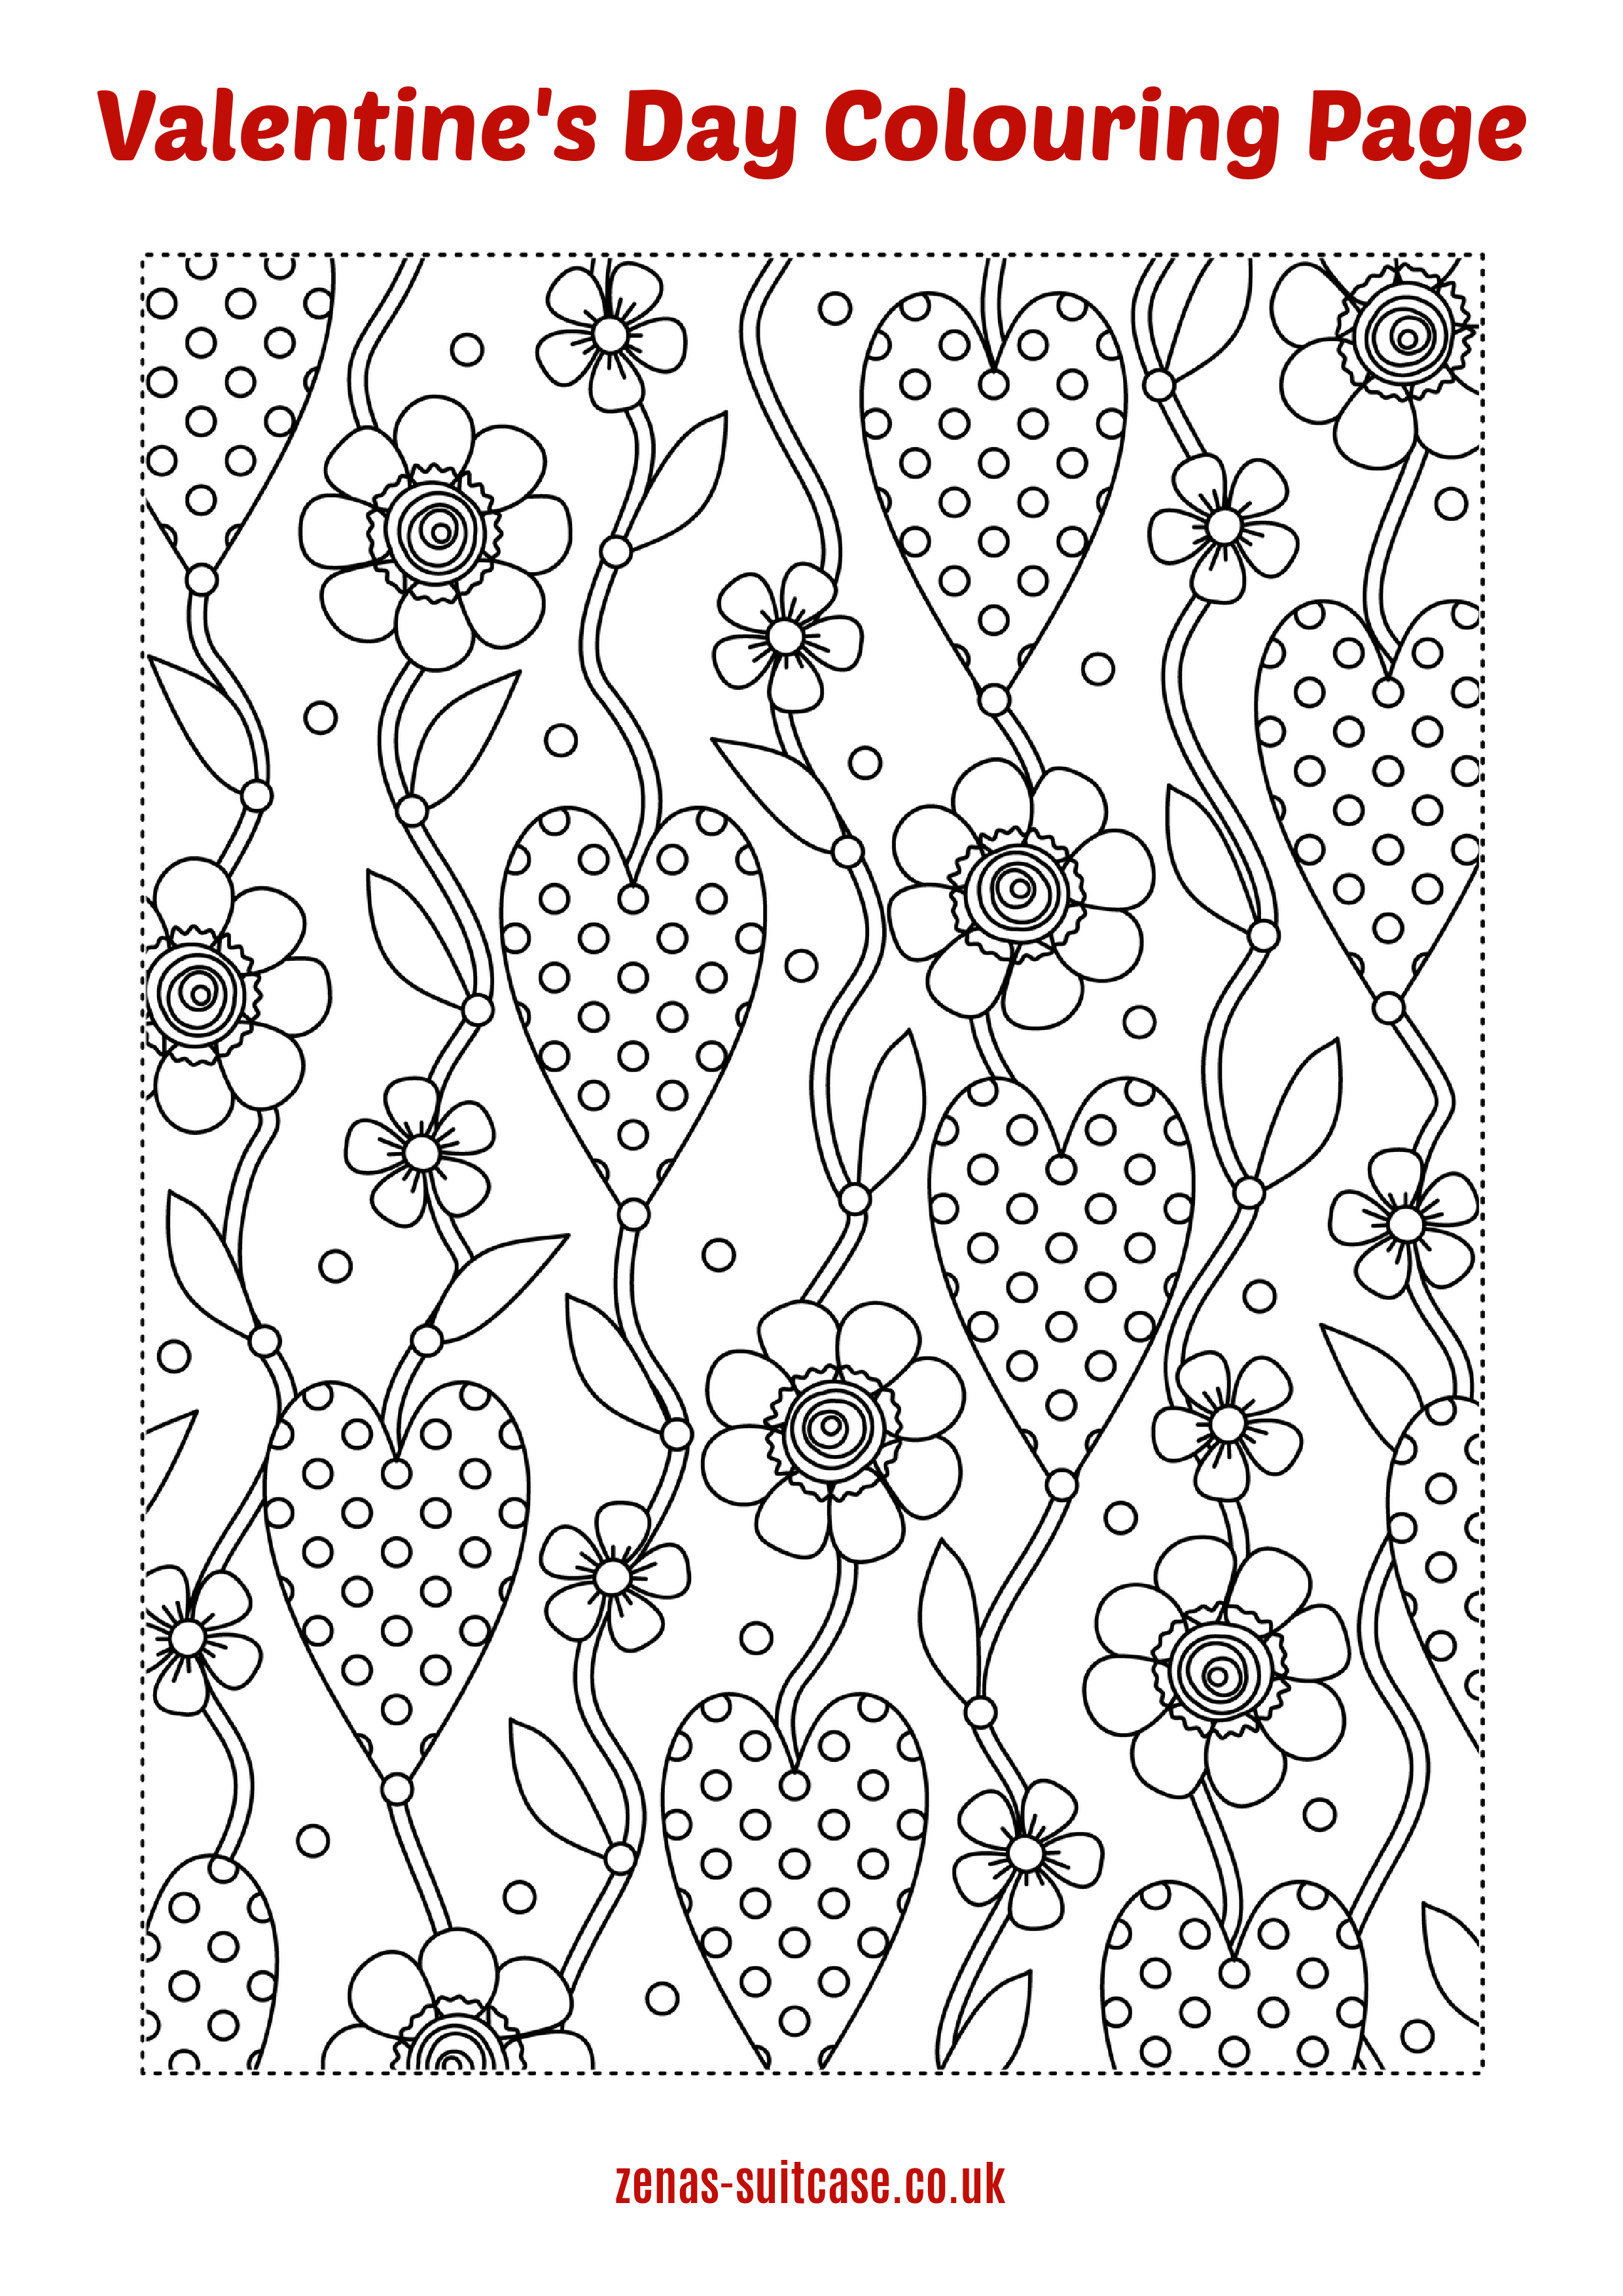 Valentine's Day Colouring page